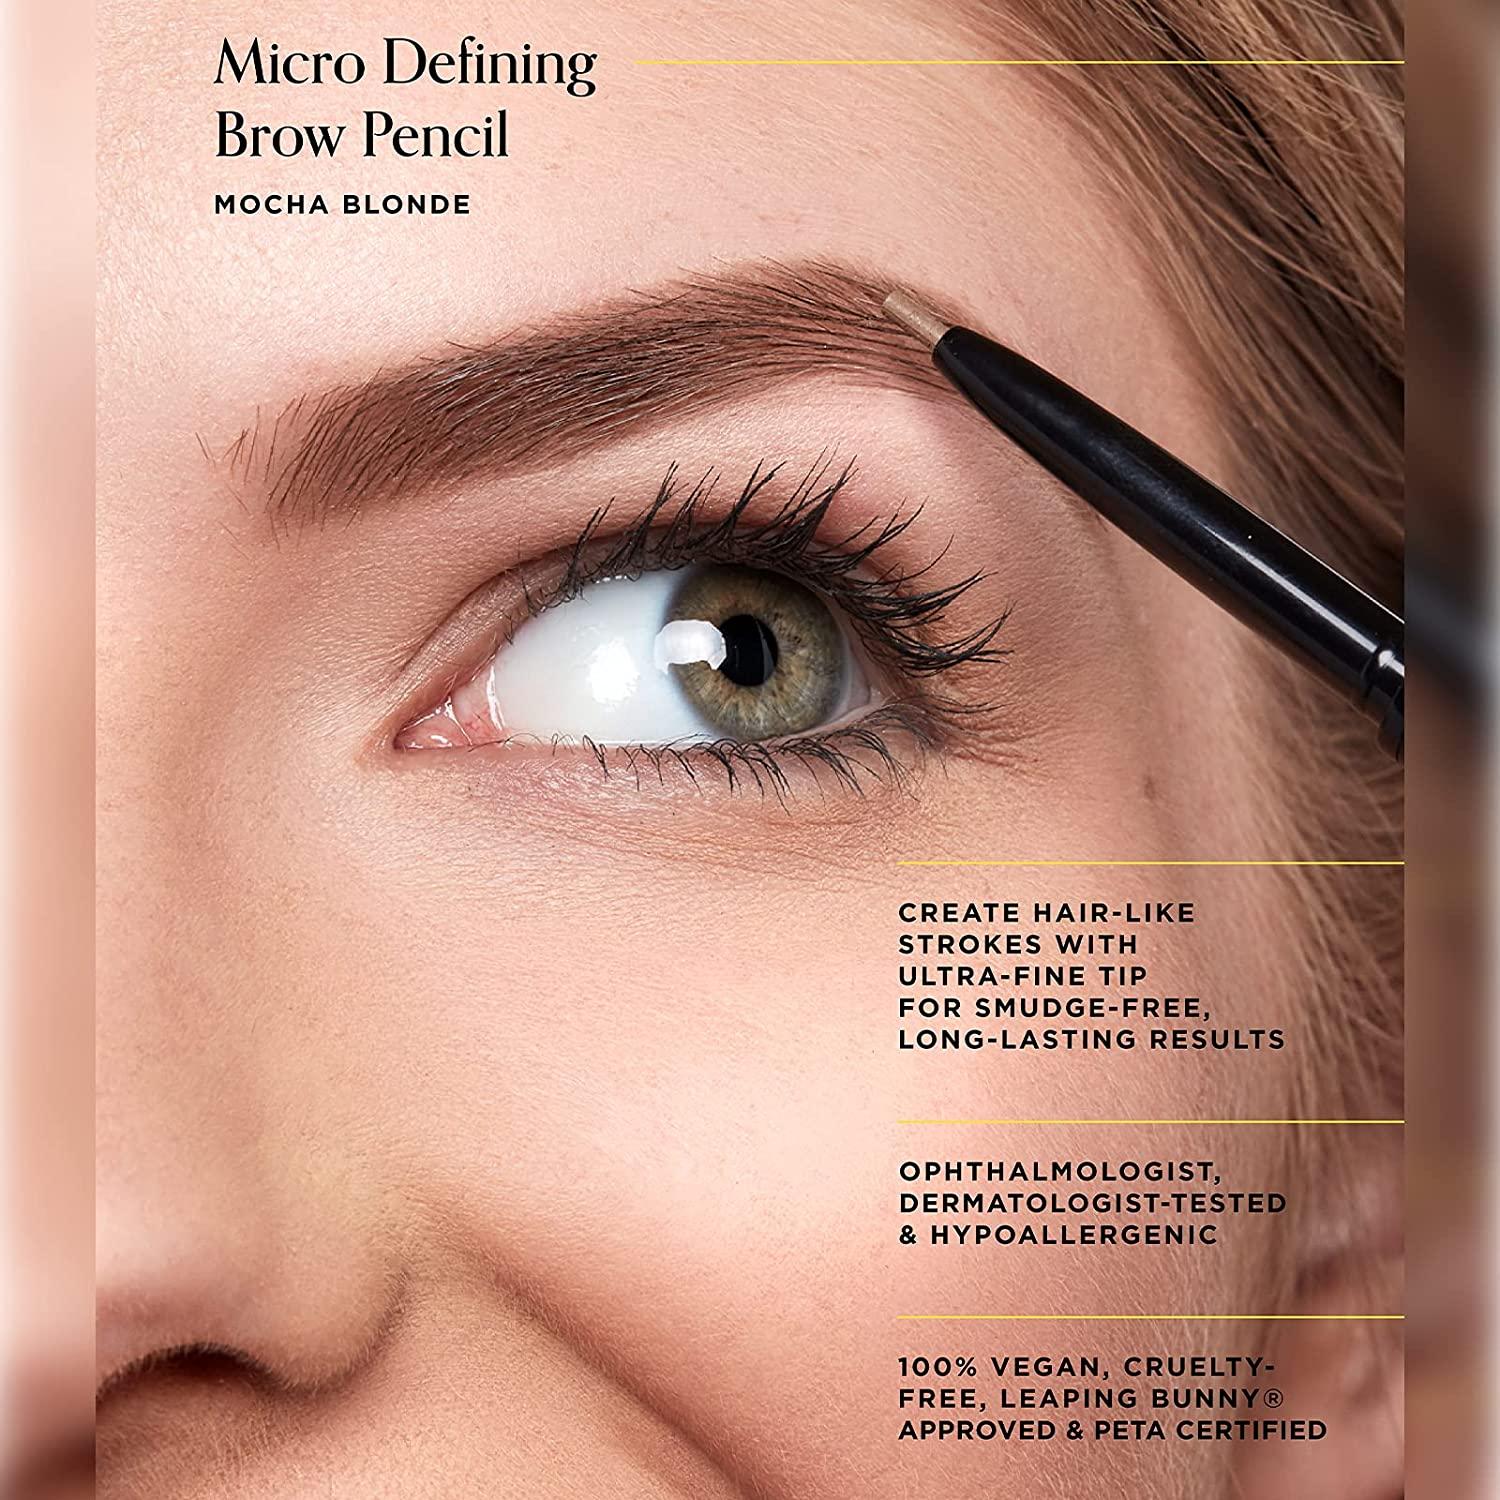 Arches & Halos Micro Defining Brow Pencil - Fuller and More Defined Brows -  Long-Lasting, Smudge Proof, Rich Color - Dual Ended Pencil with Brush -  Vegan and Cruelty Free - Mocha Blonde - 0.003 oz